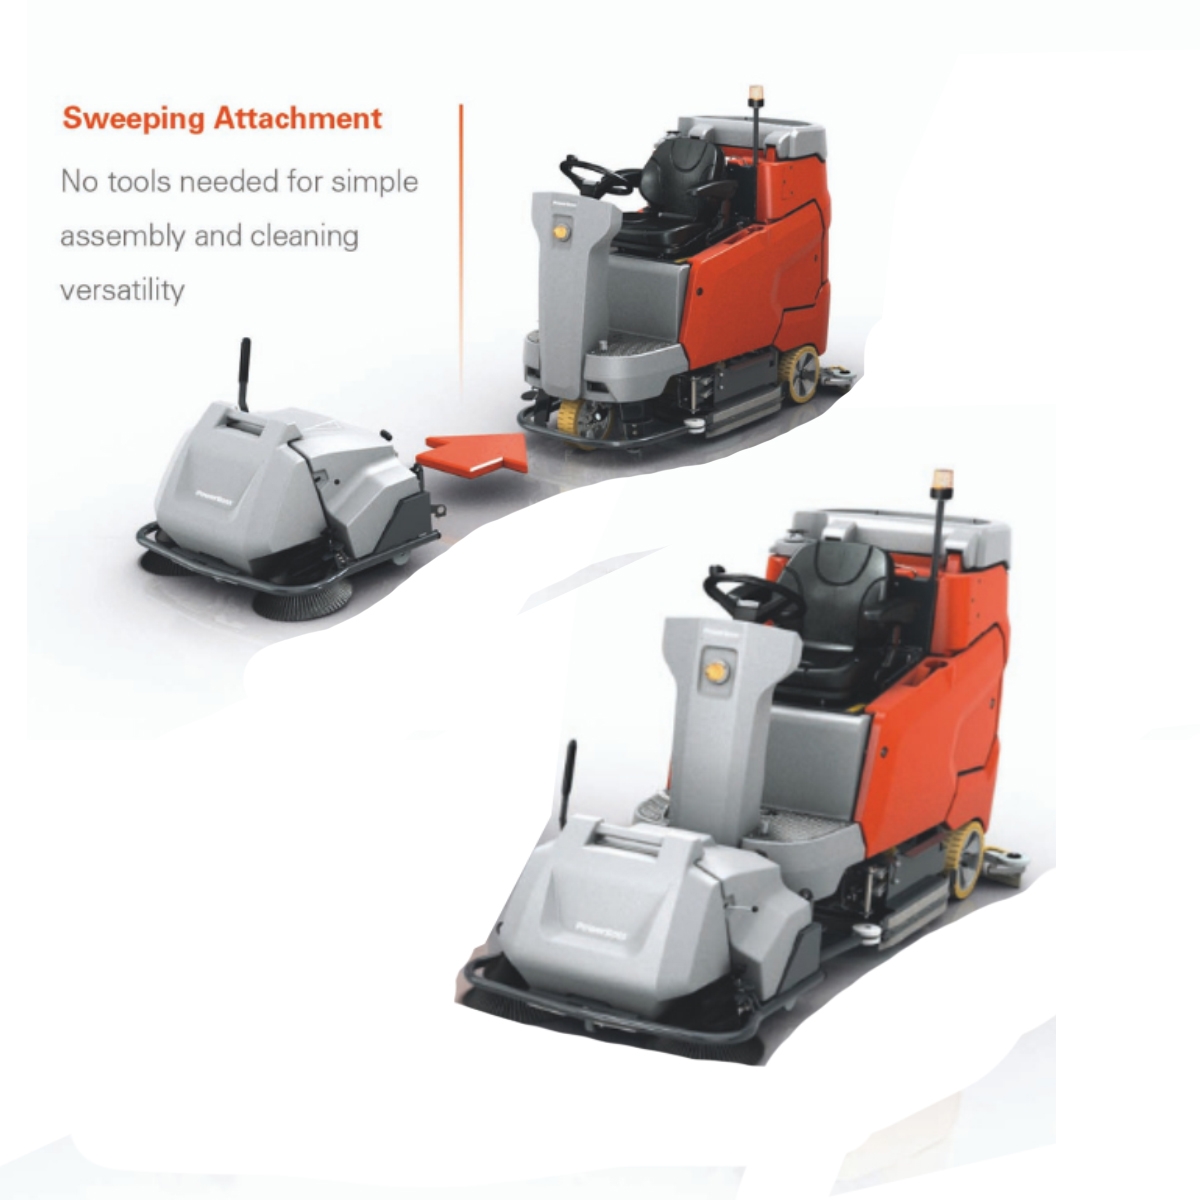 The Scrubmaster B175 offers operator comfort, industrial durability and superior cleaning results, all in one compact package. The B175 is available in two versatile cleaning platforms to meet every day cleaning needs: 33” dual cylindrical for wet sweeping and scrubbing in a single pass, or 42” dual disc for a balanced deep scrub for high-performance flooring needs. In addition, the B175 disc model offers an optional pre-sweep attachment that immediately transforms the machine into a TRUE sweeper-scrubber (dry sweep and wet scrub in a single pass).